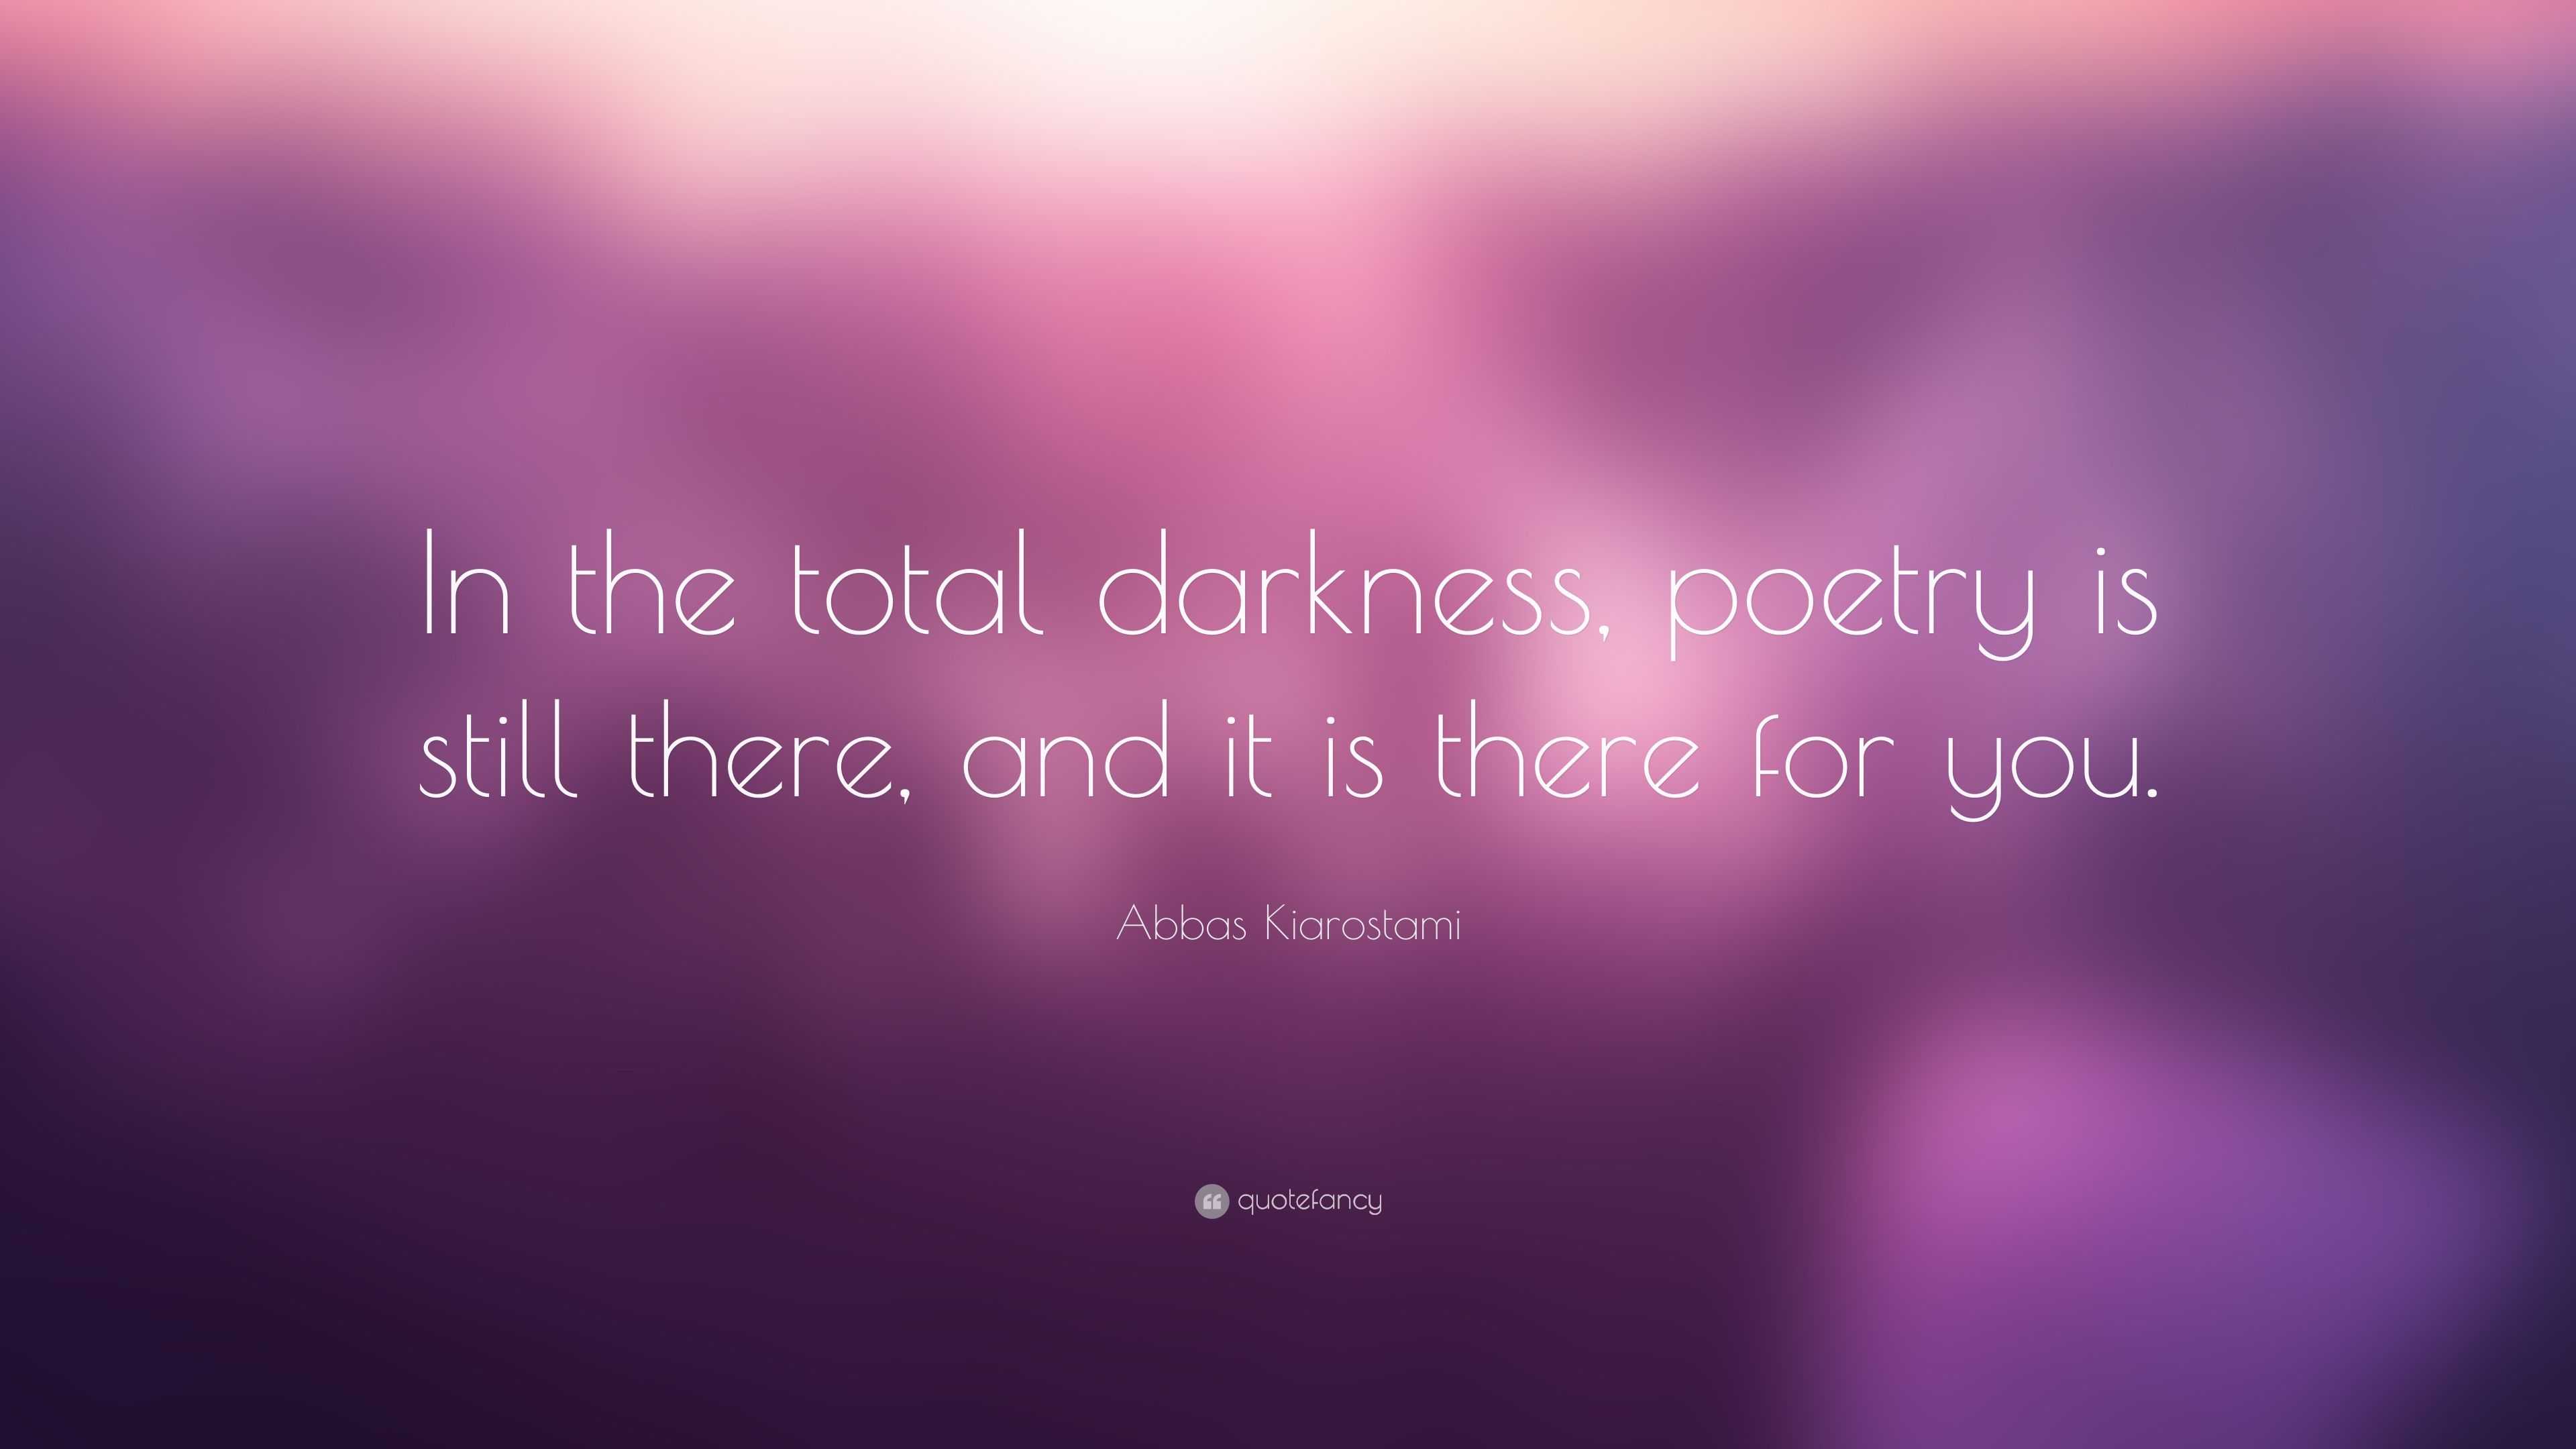 Abbas Kiarostami Quote: “In the total darkness, poetry is still there ...